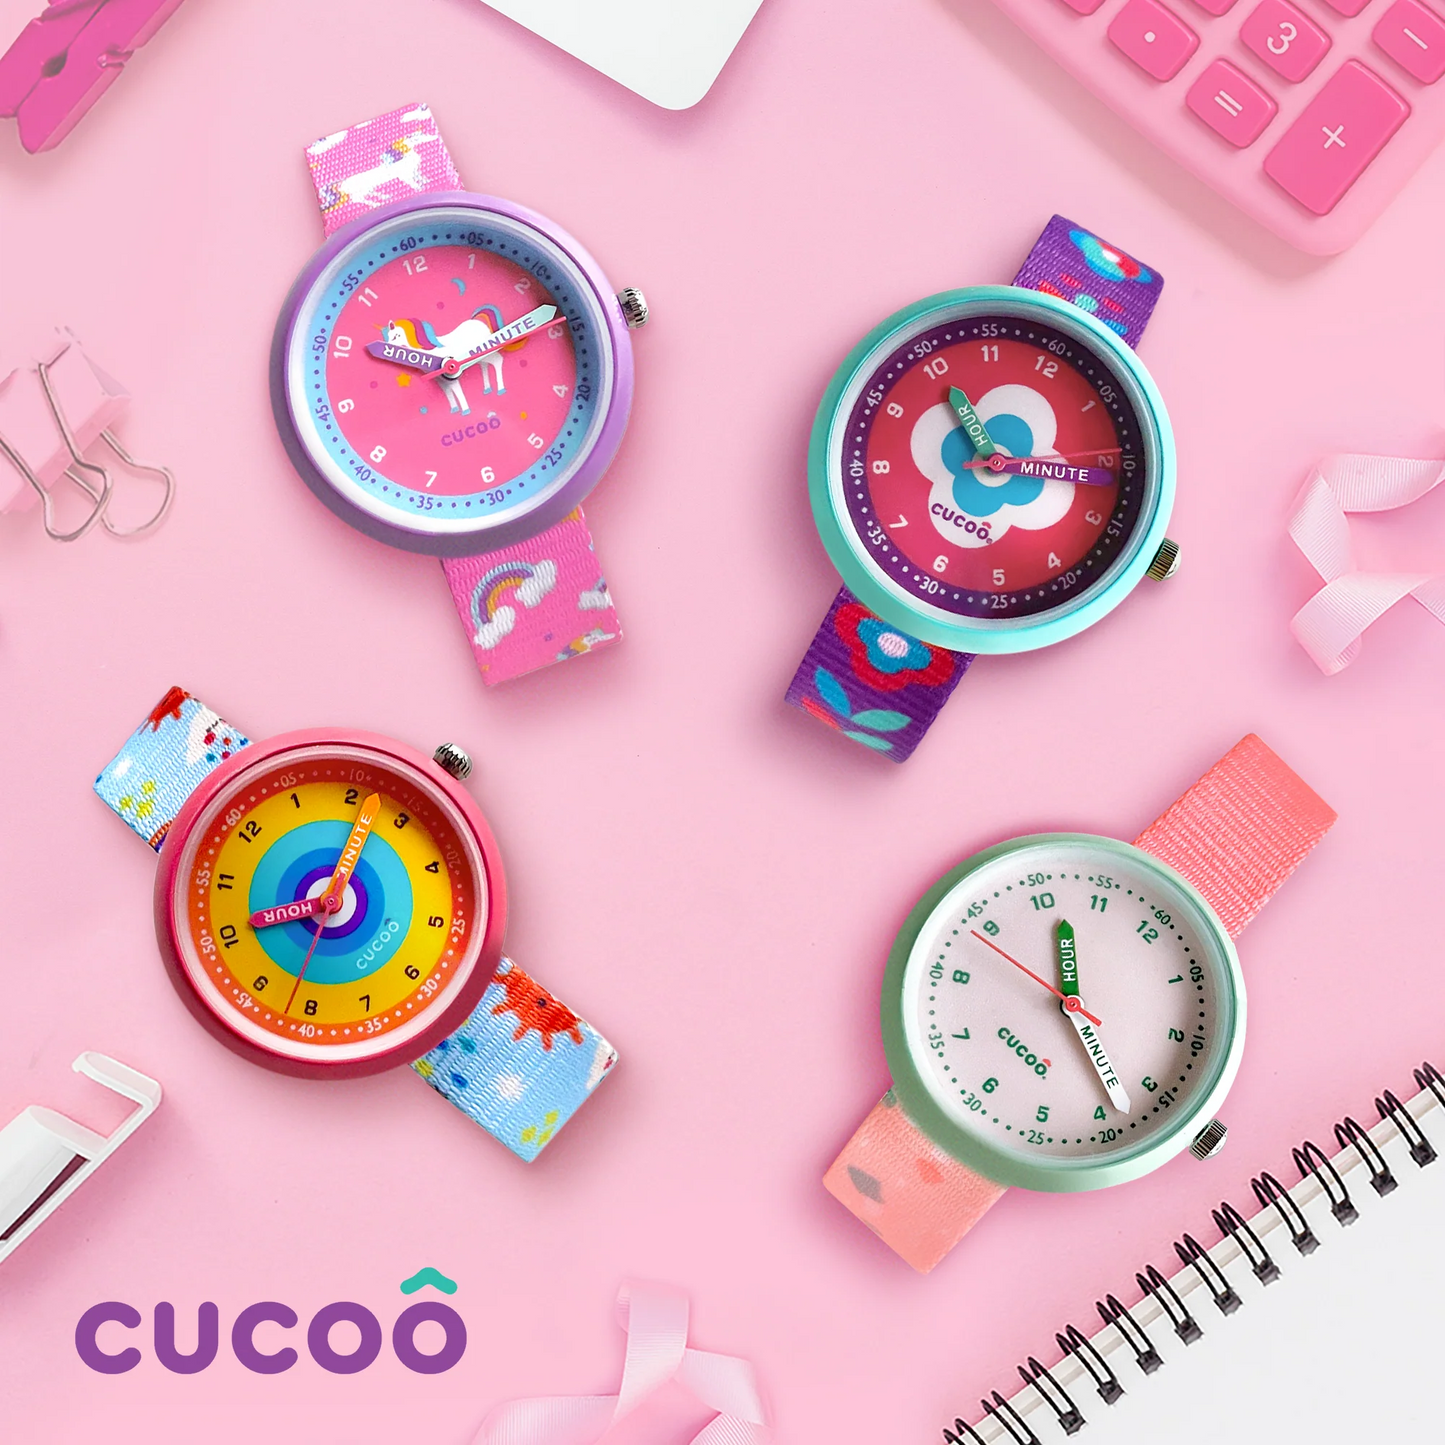 Cucoô Kids Watches 33mm (Analog) Batch 1 of 2